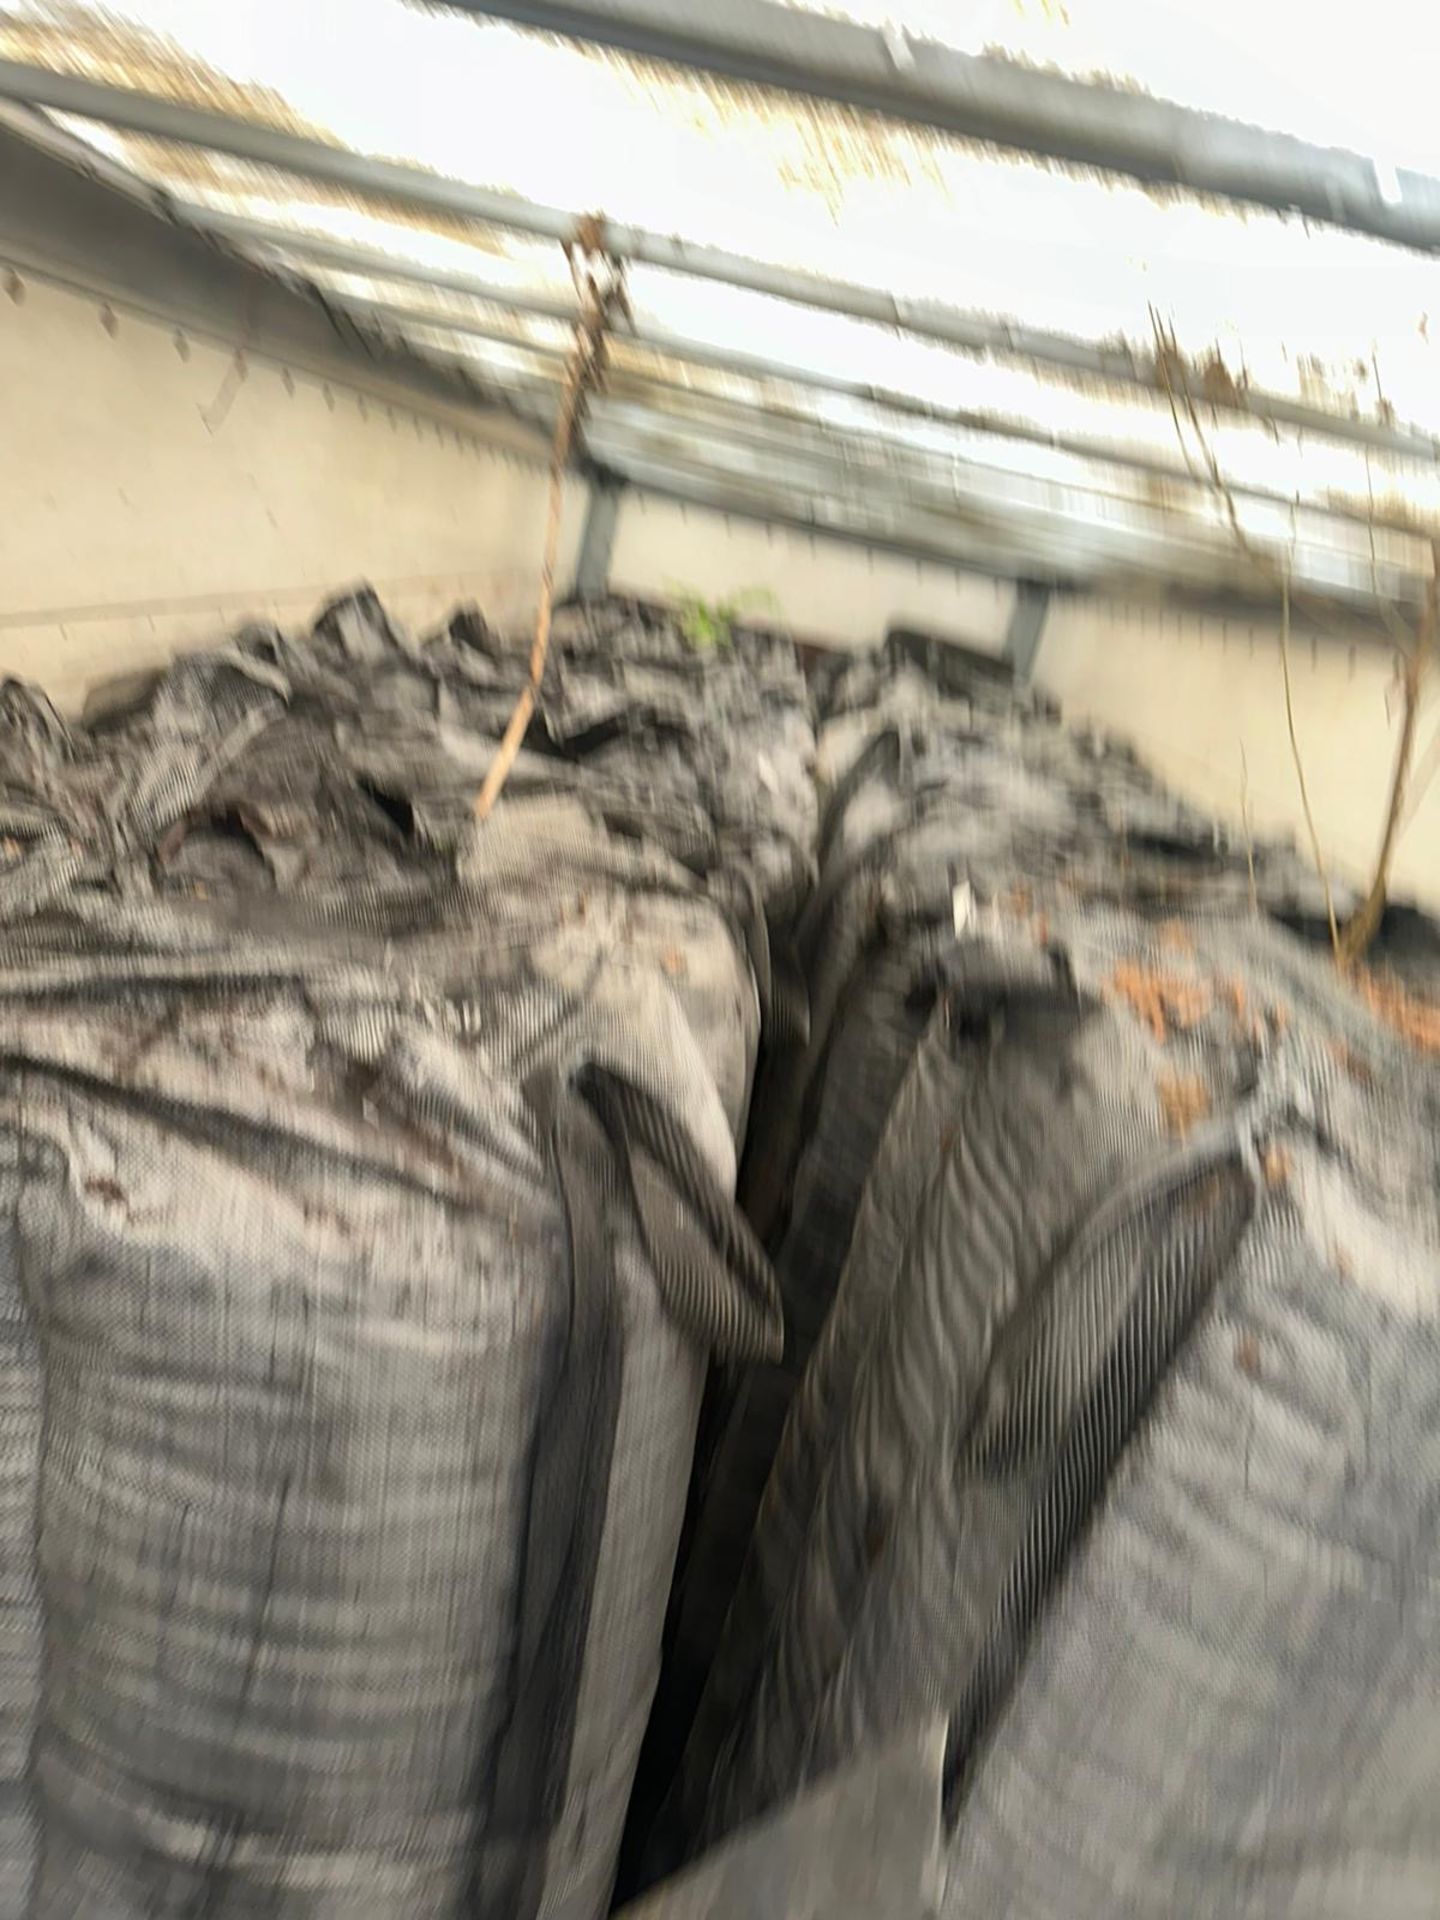 CARBON BLACK RAW MATERIAL BULK BAGS APPROX 14 TONNES - Image 2 of 8